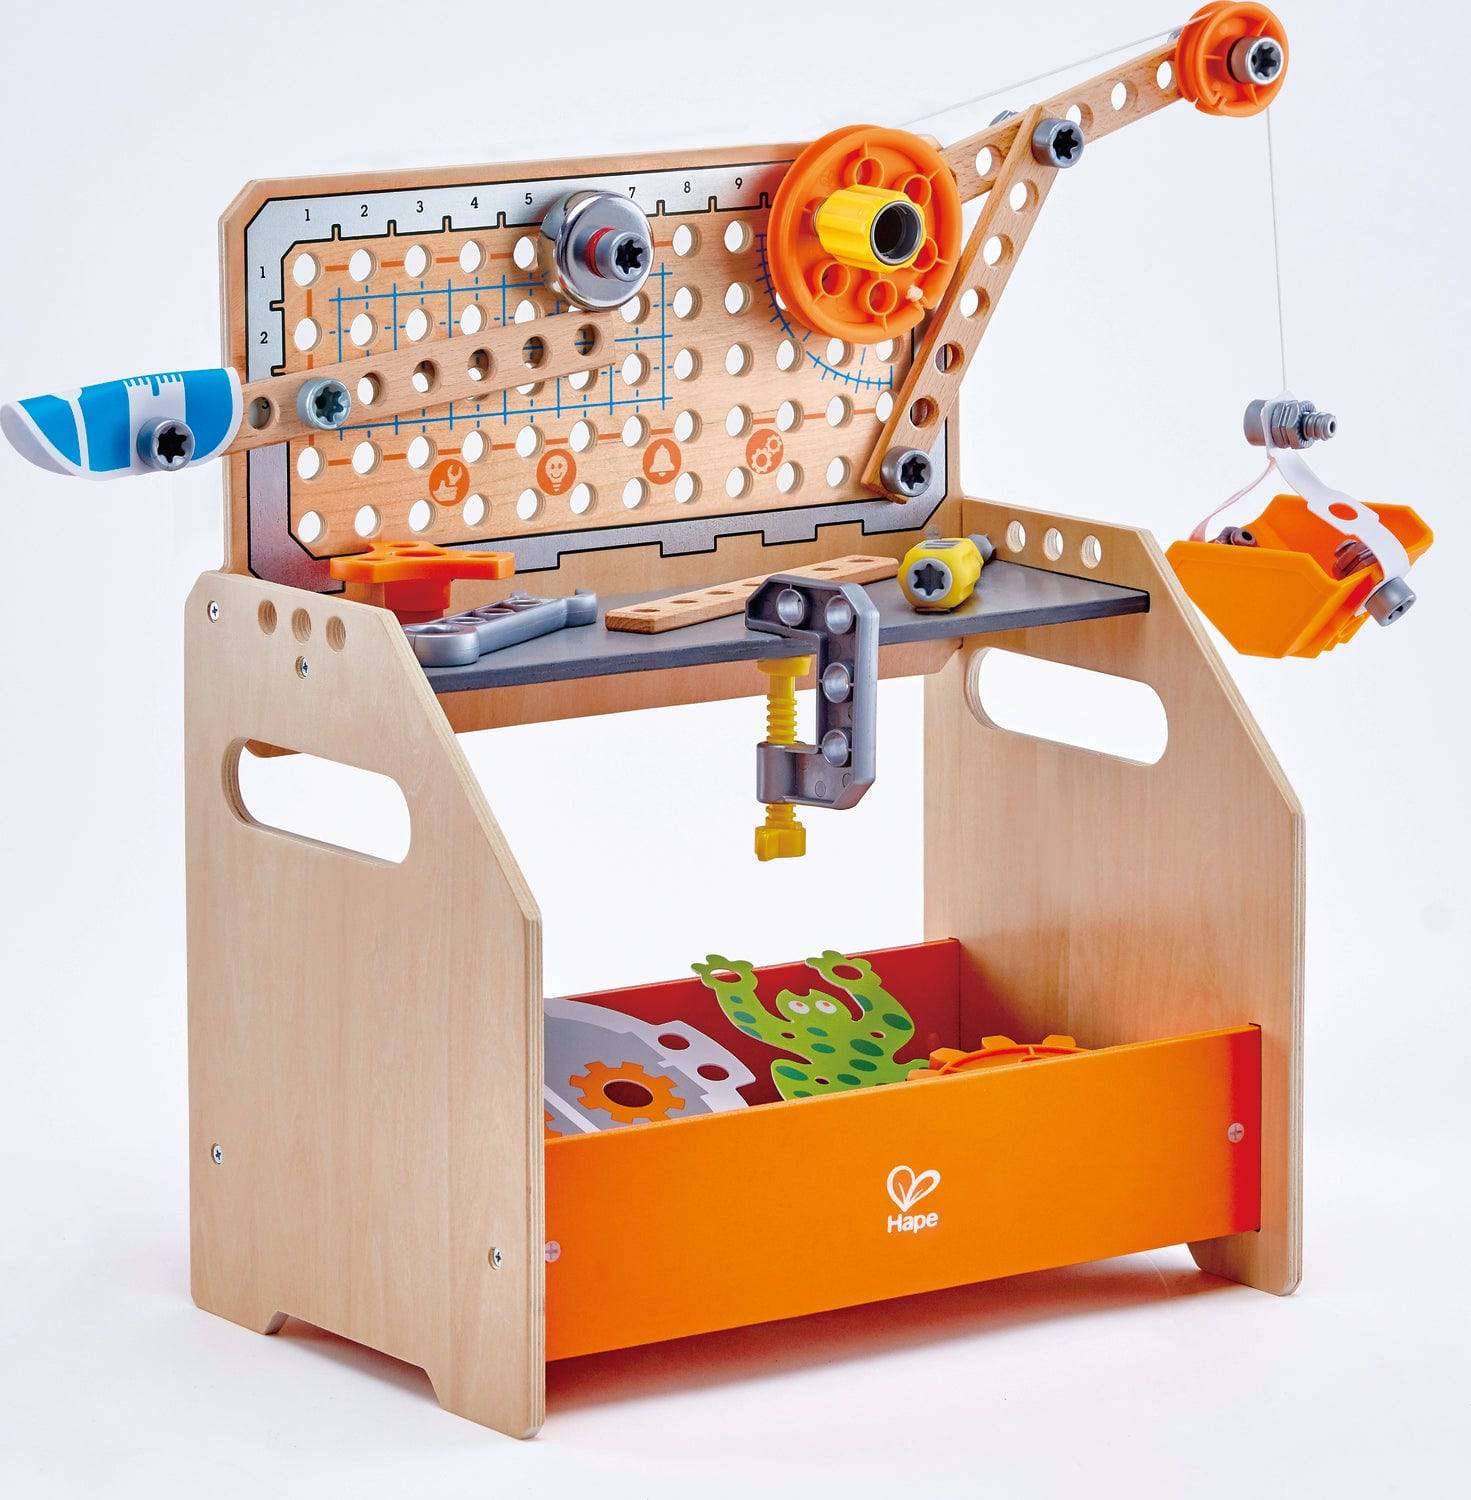 Discovery Workbench - A Child's Delight